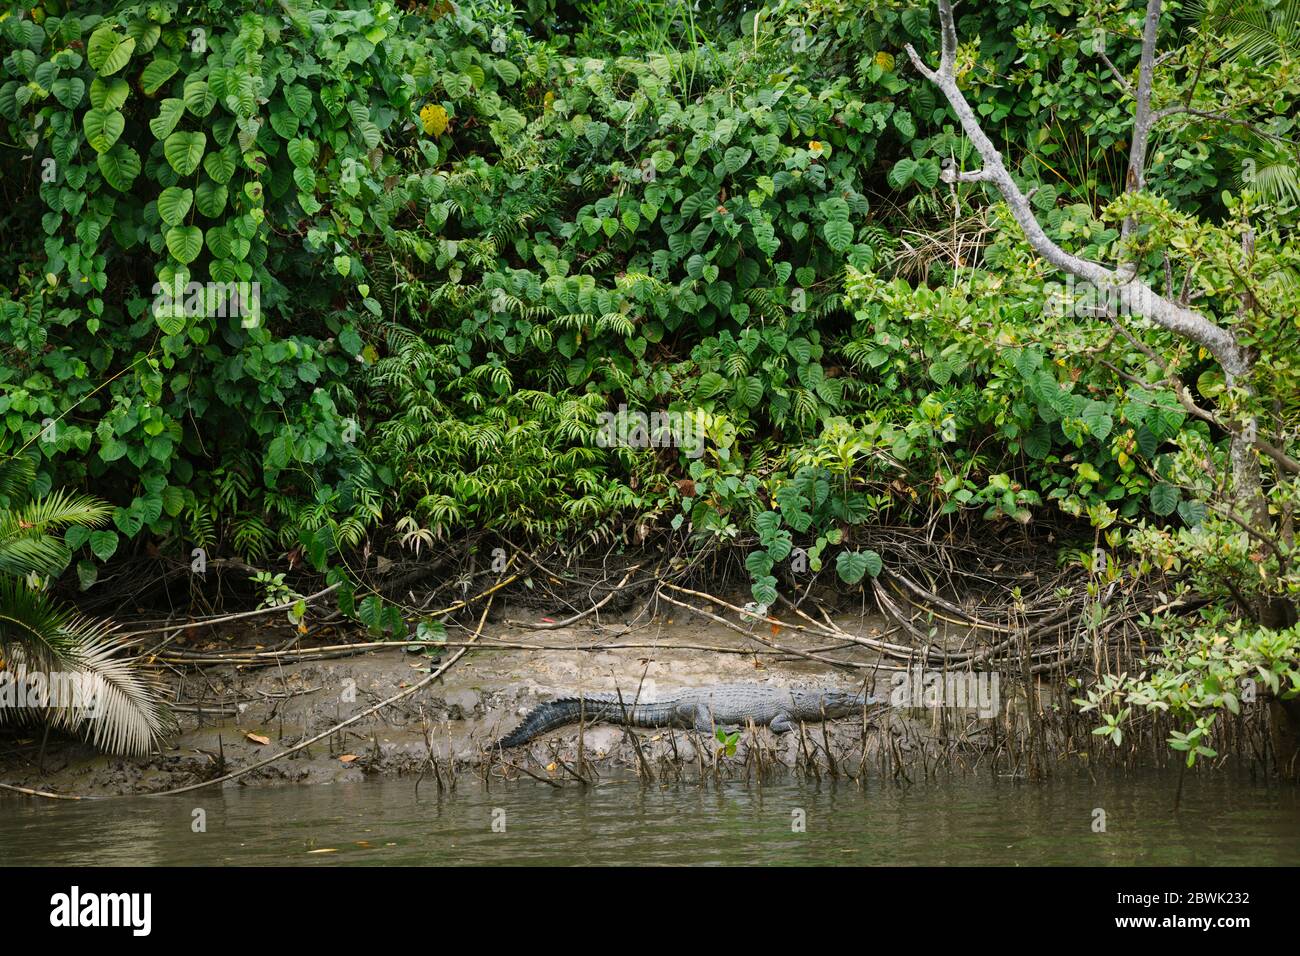 A salt water crocodile rests on the shore of the Daintree River in Far North Queensland, Australia Stock Photo